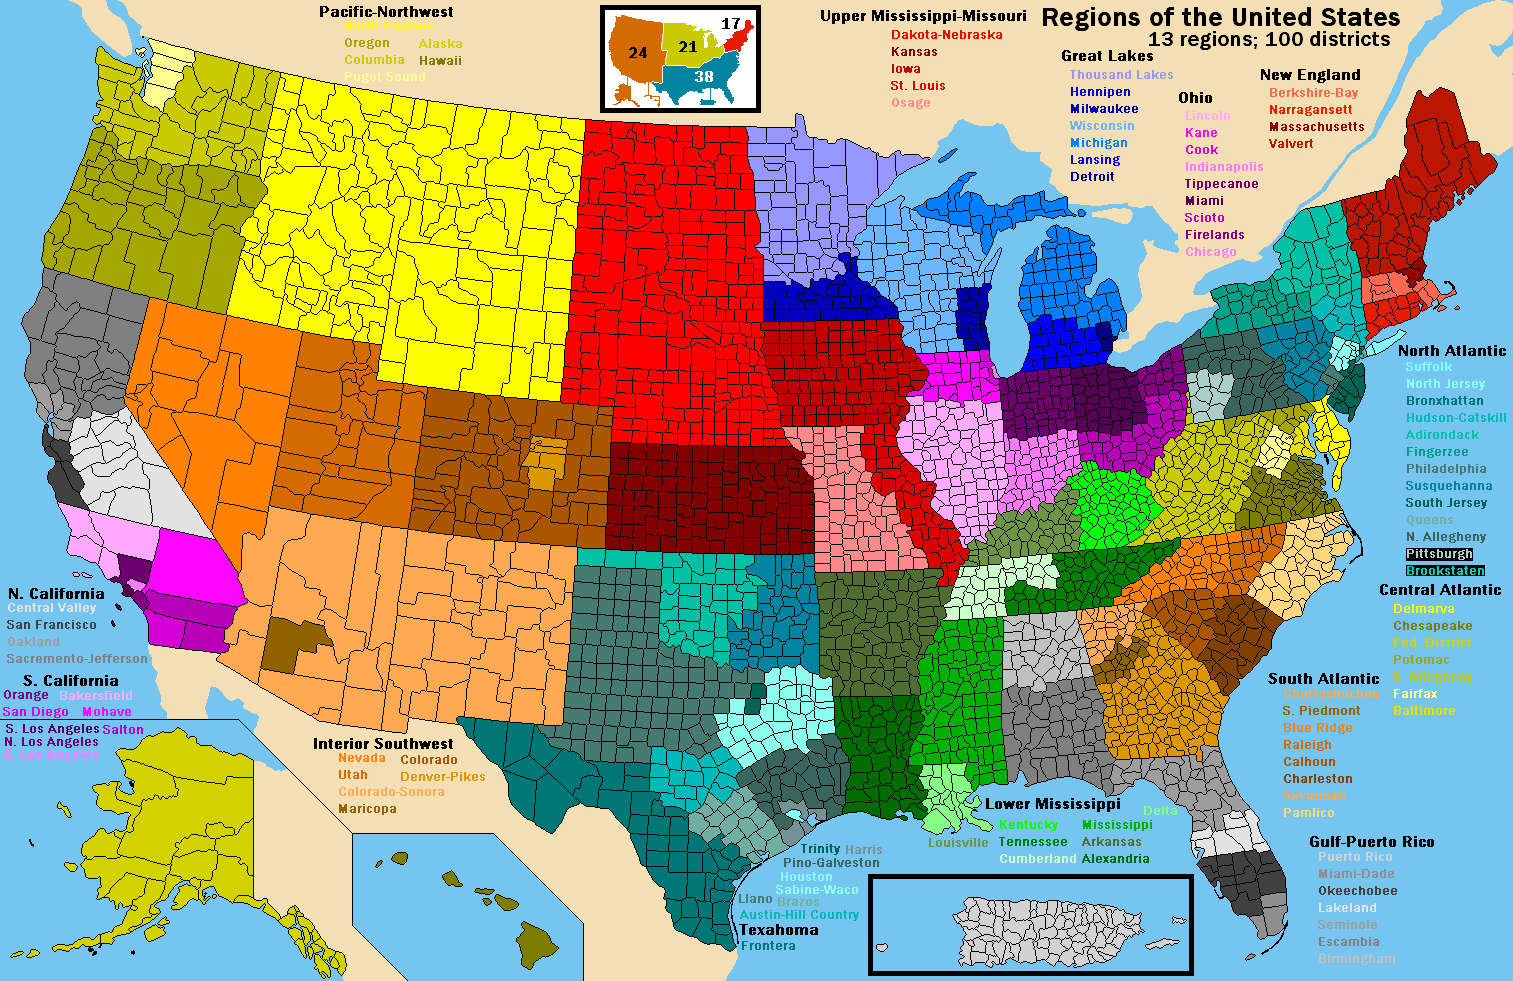 regions of the united states.PNG